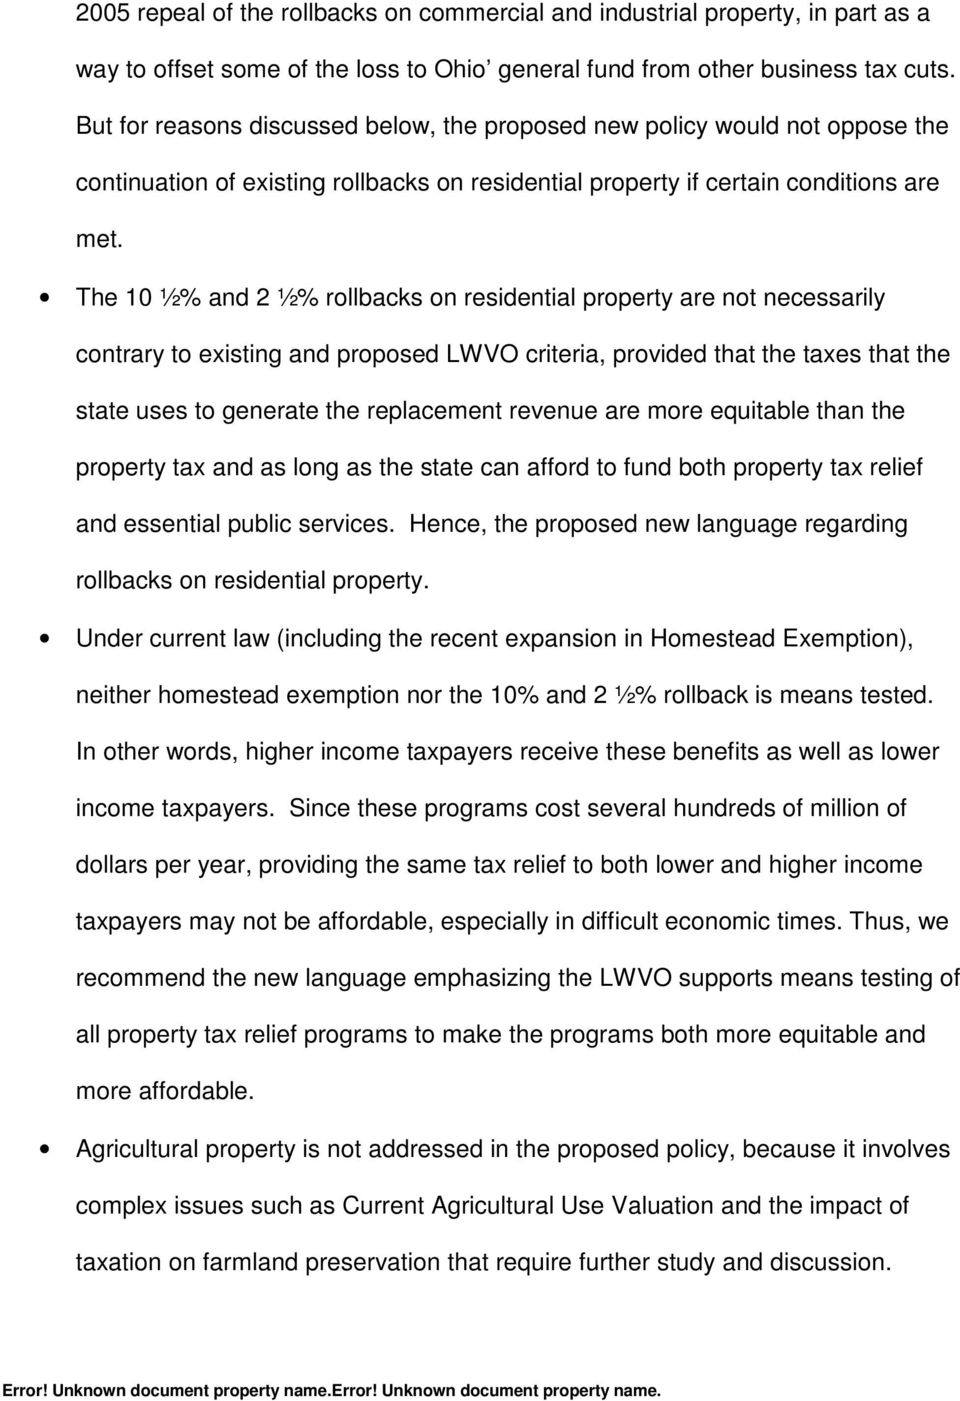 The 10 ½% and 2 ½% rollbacks on residential property are not necessarily contrary to existing and proposed LWVO criteria, provided that the taxes that the state uses to generate the replacement